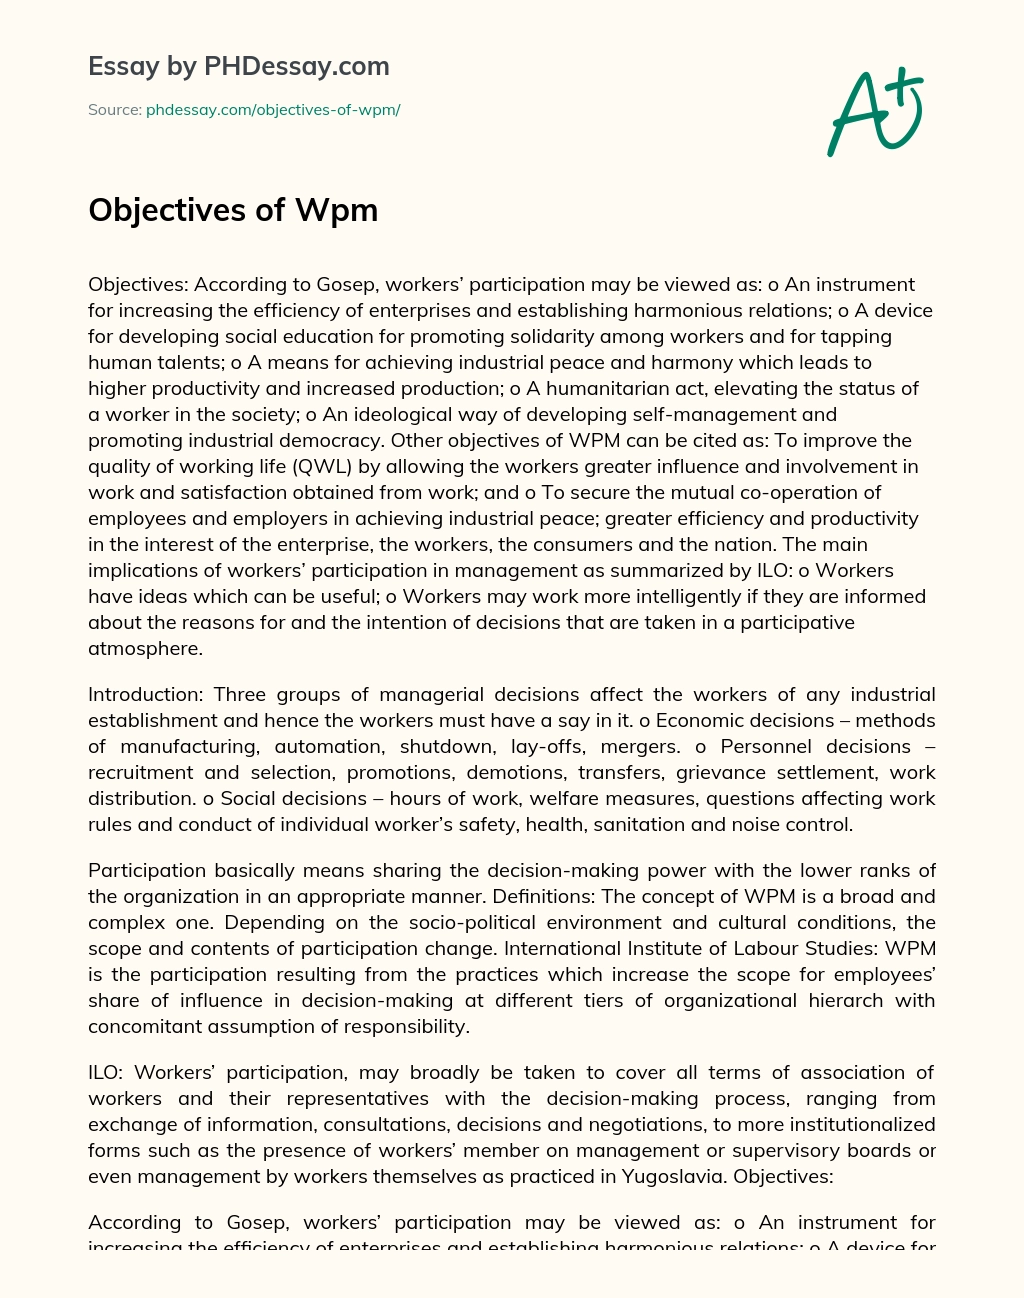 Objectives of Wpm essay